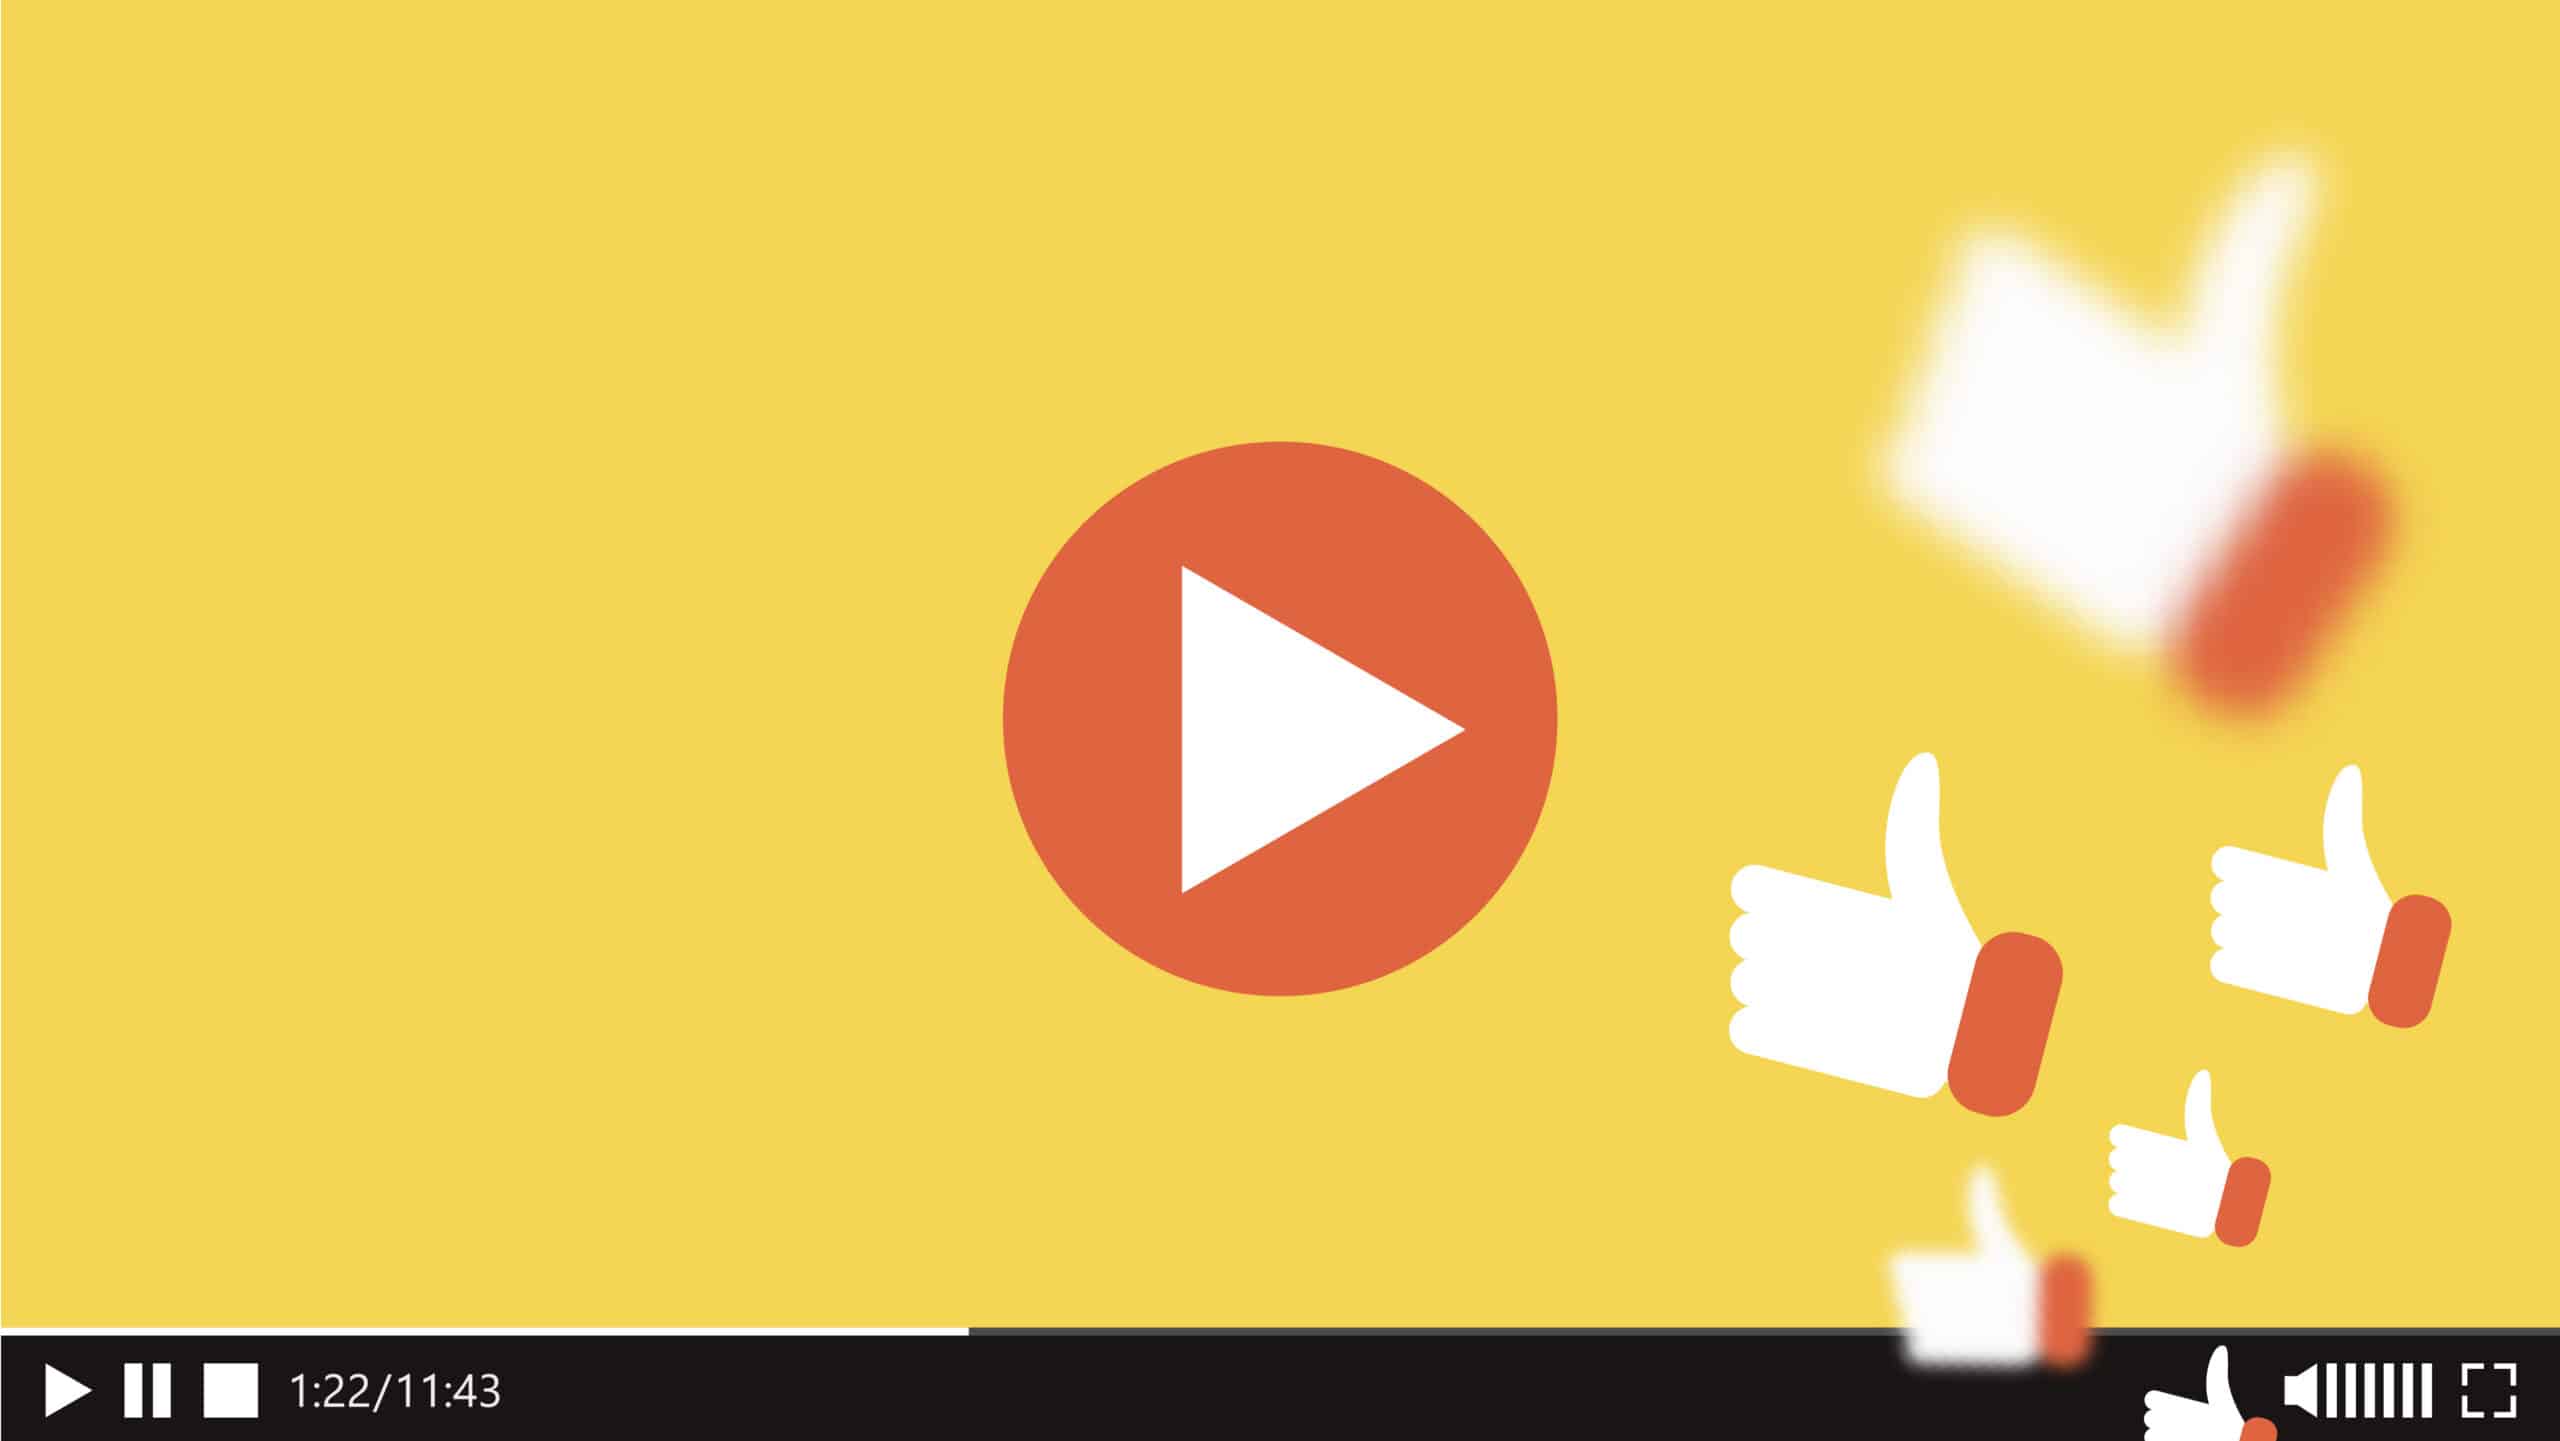 Video marketing symbolized by thumbs up and play button